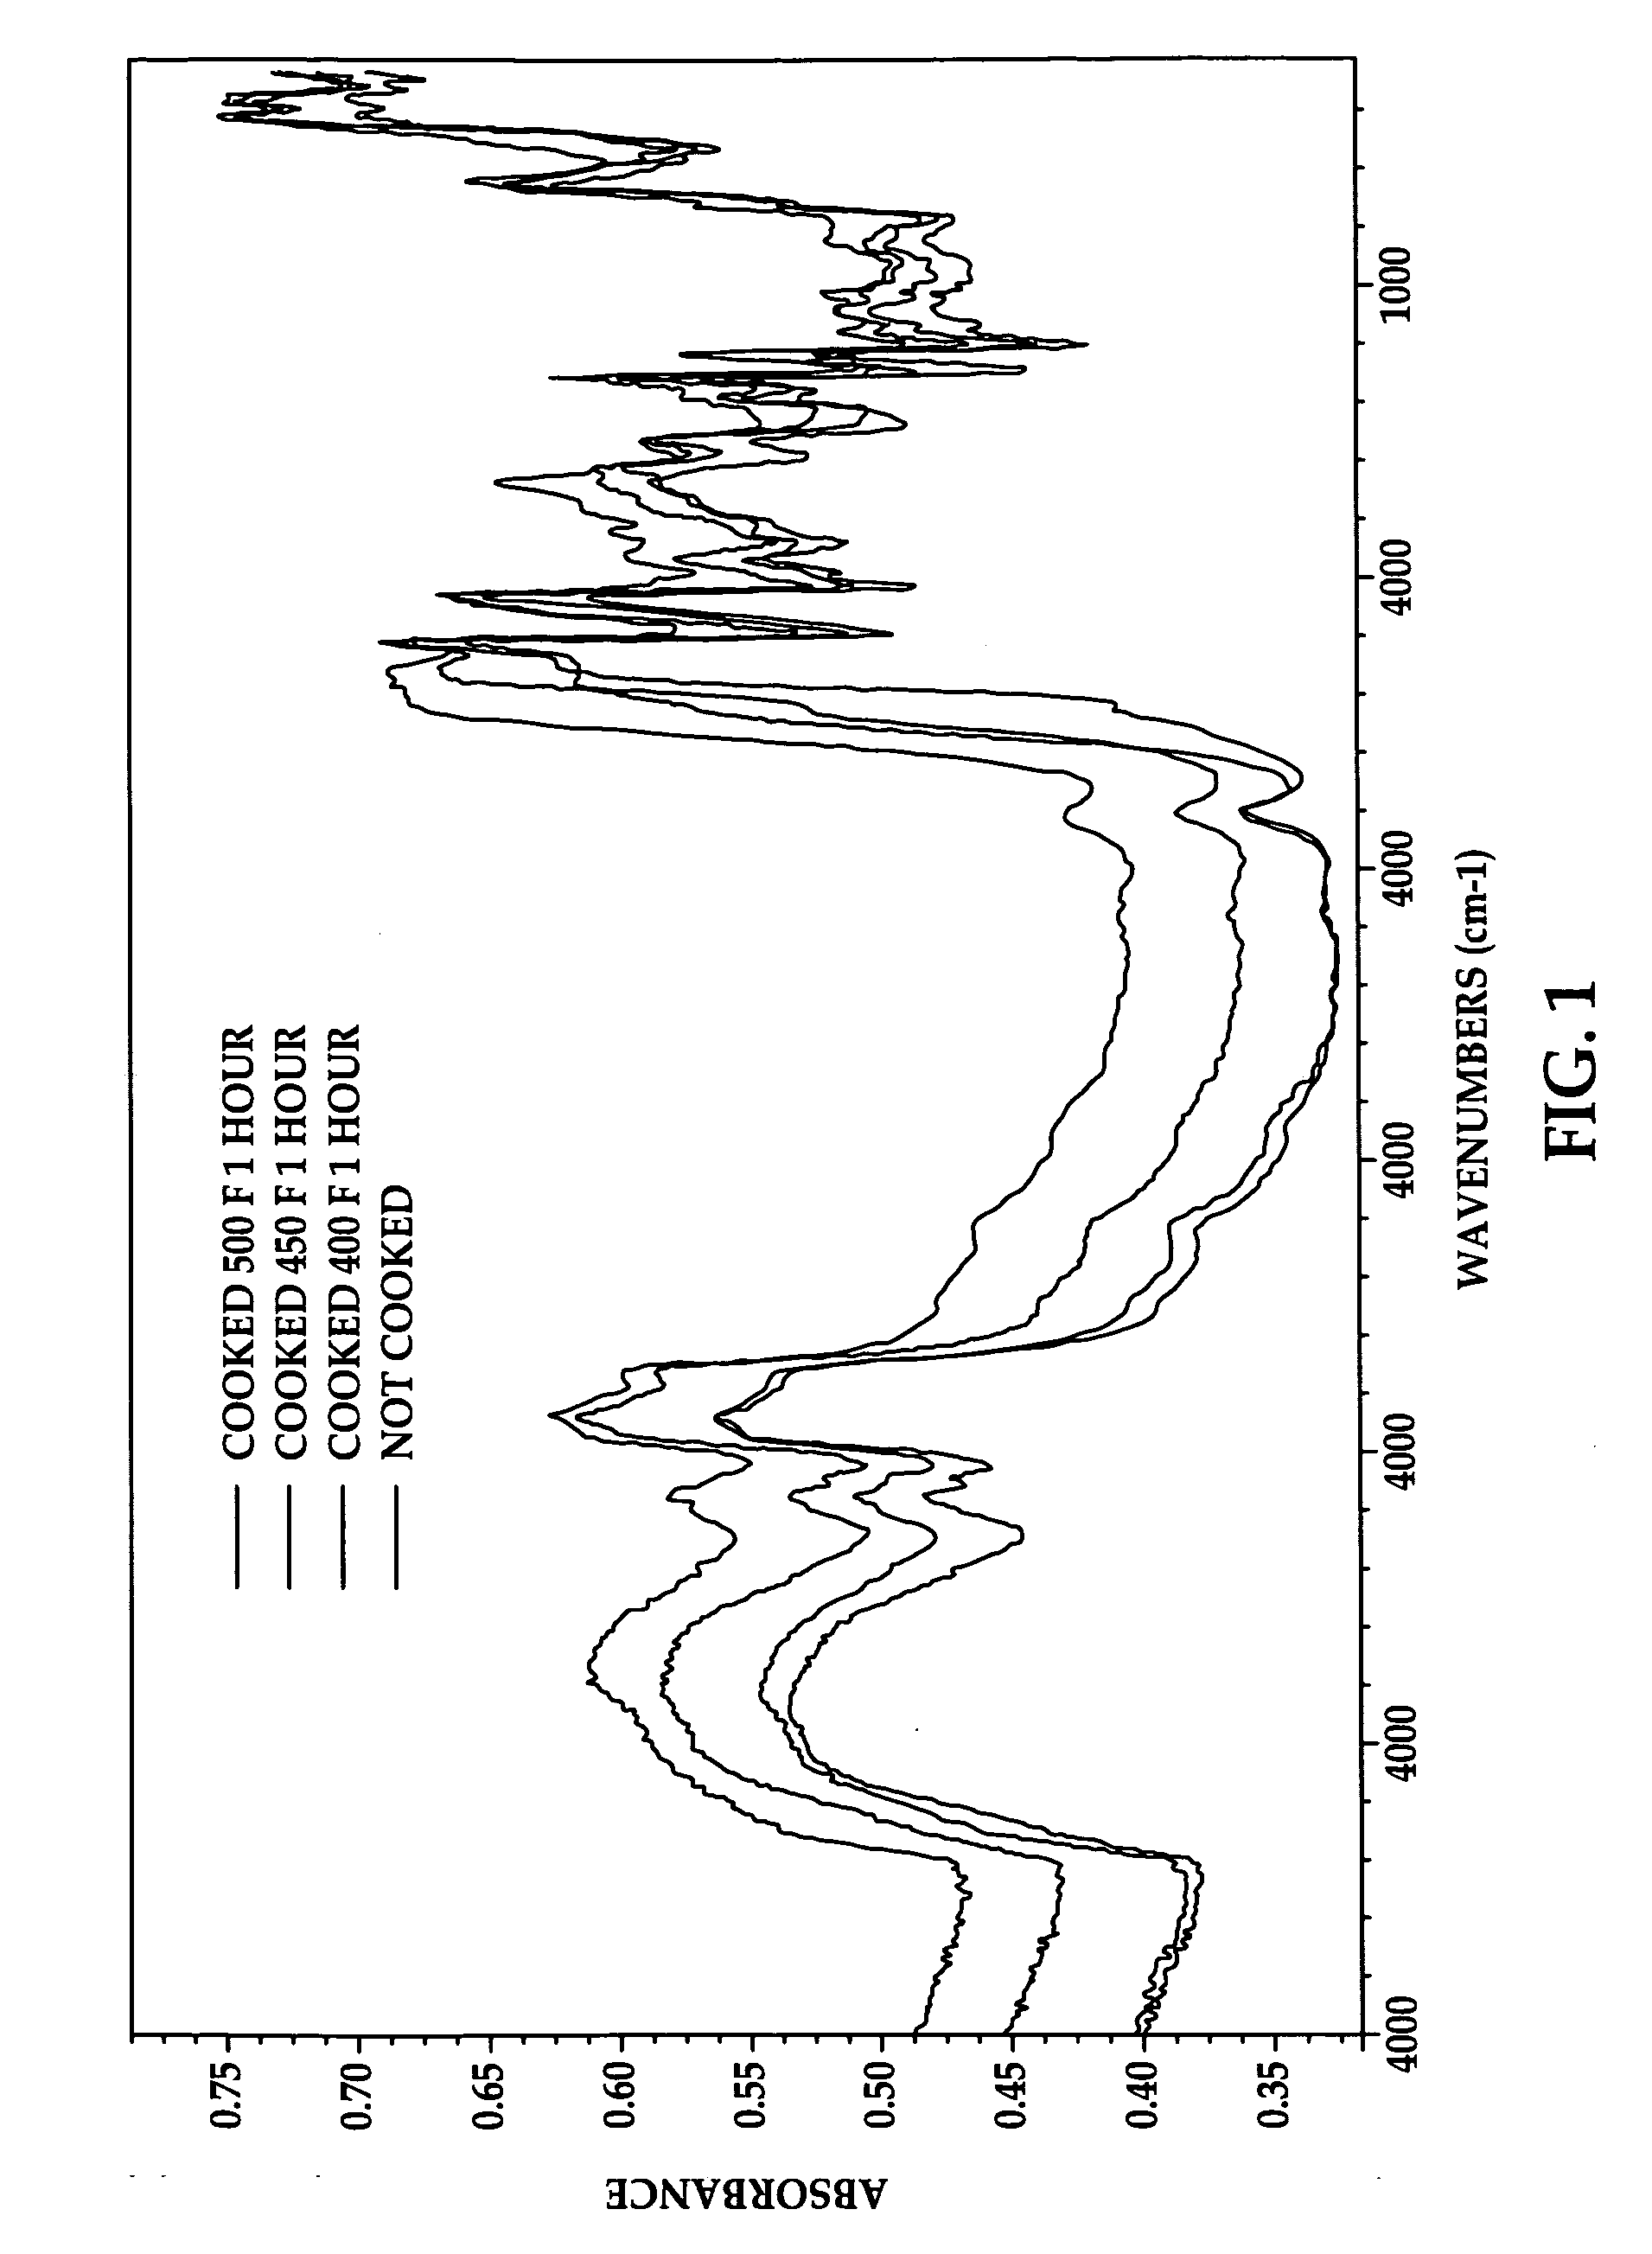 Thermal Effect Measurement with Mid-Infrared Spectroscopy